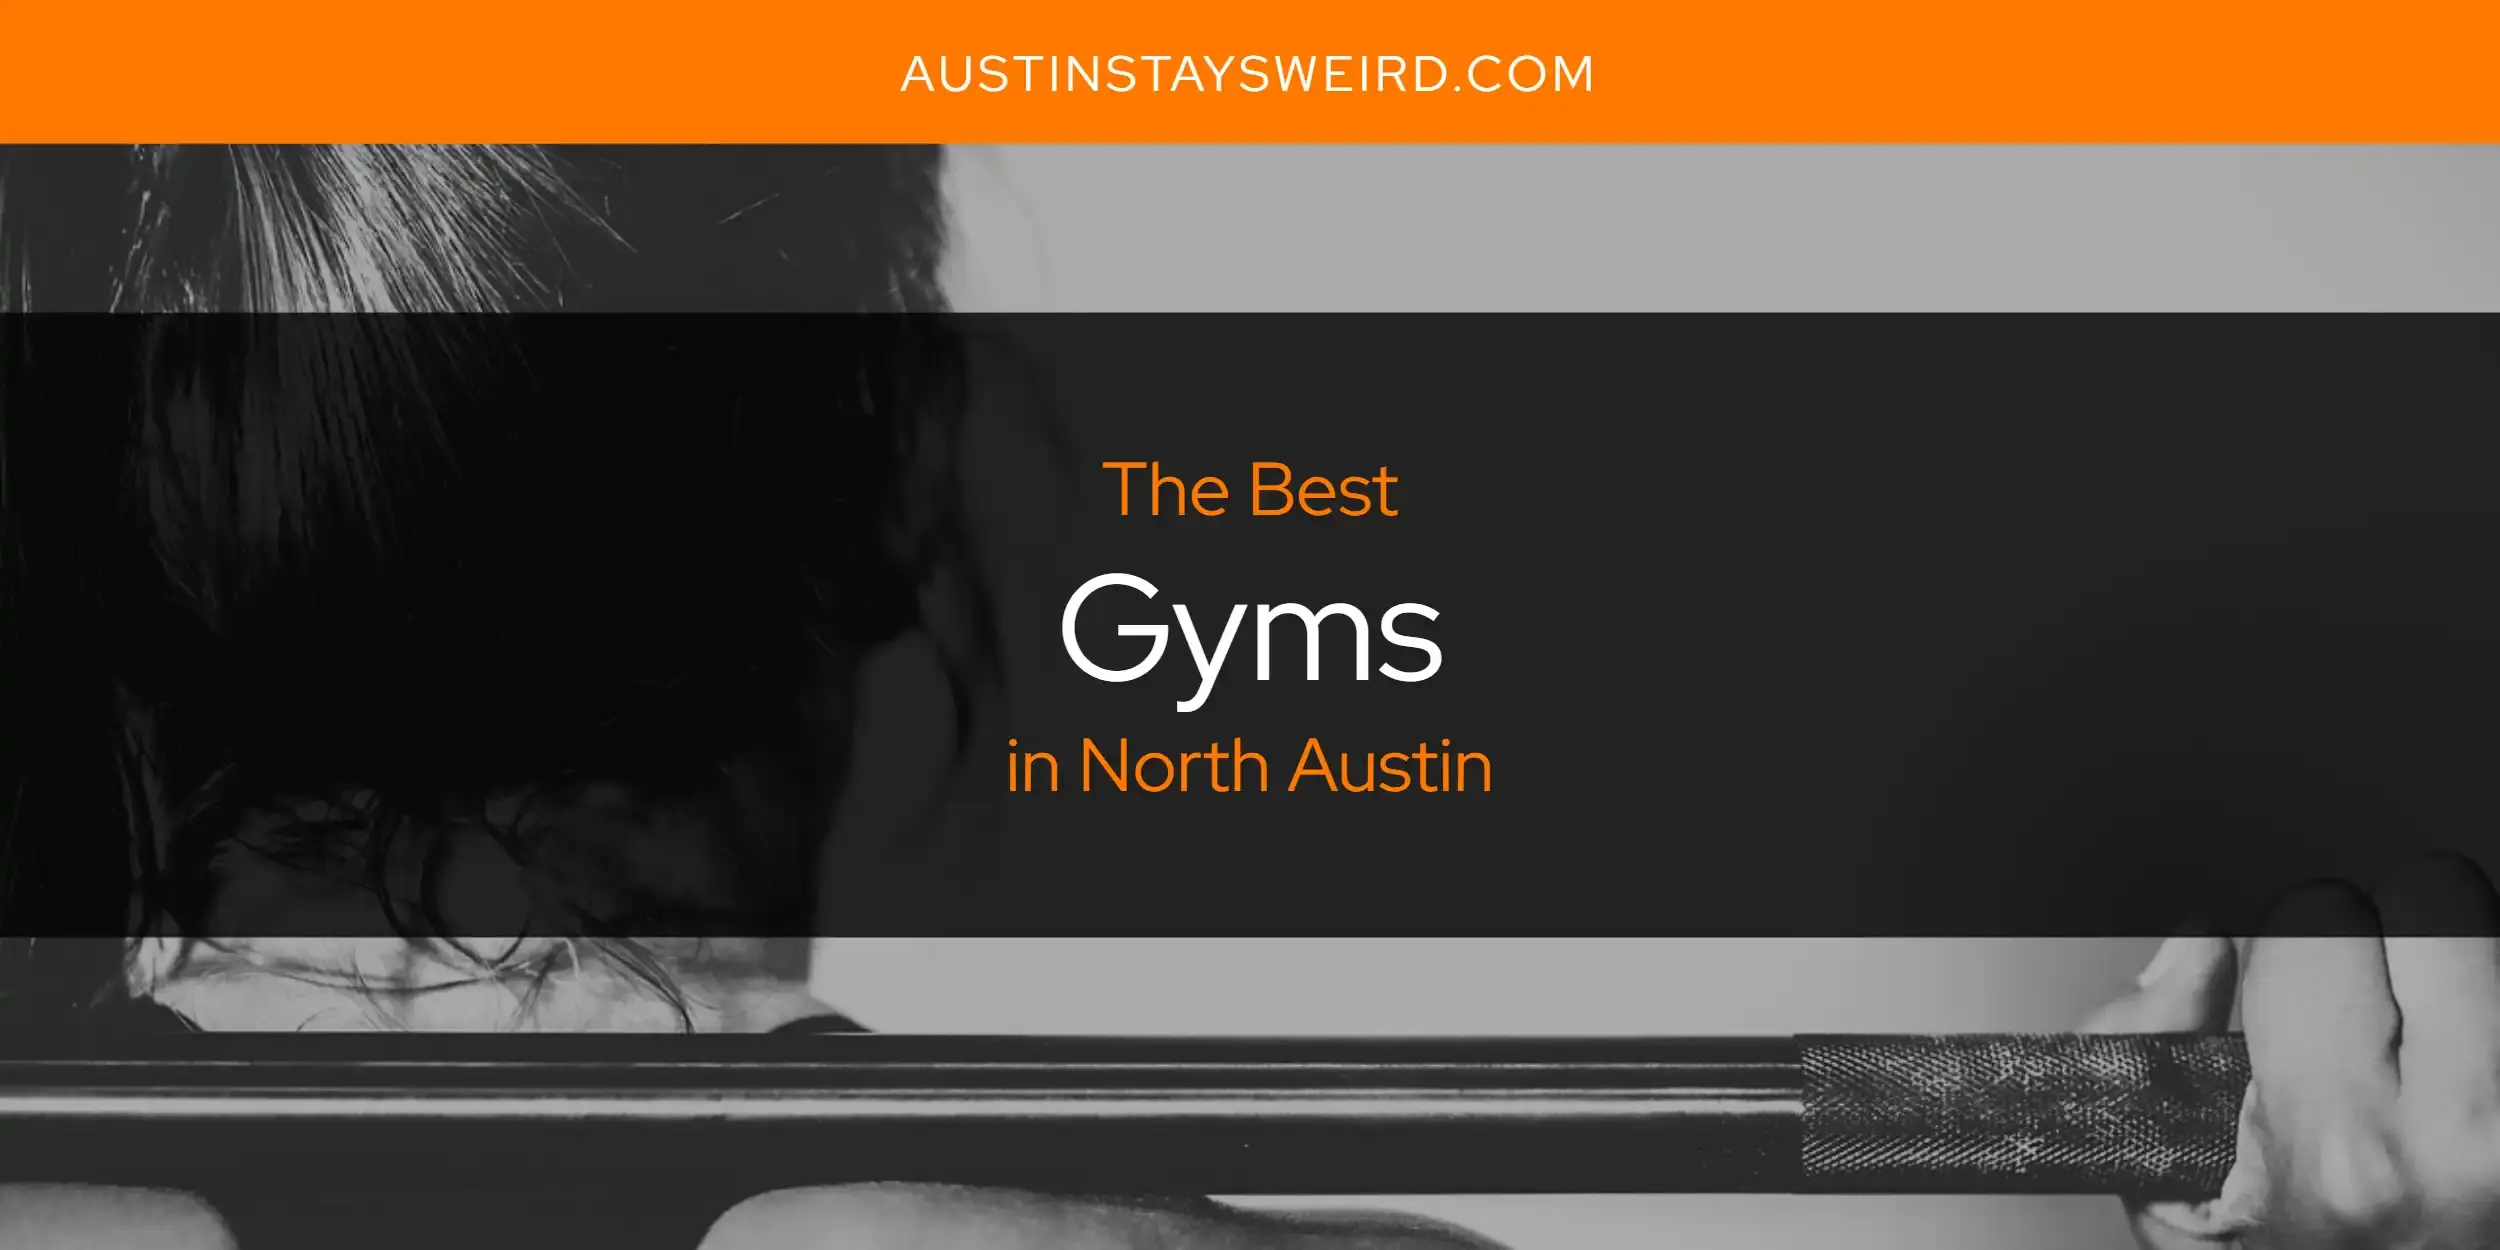 Best Gyms in North Austin? Here's the Top 8